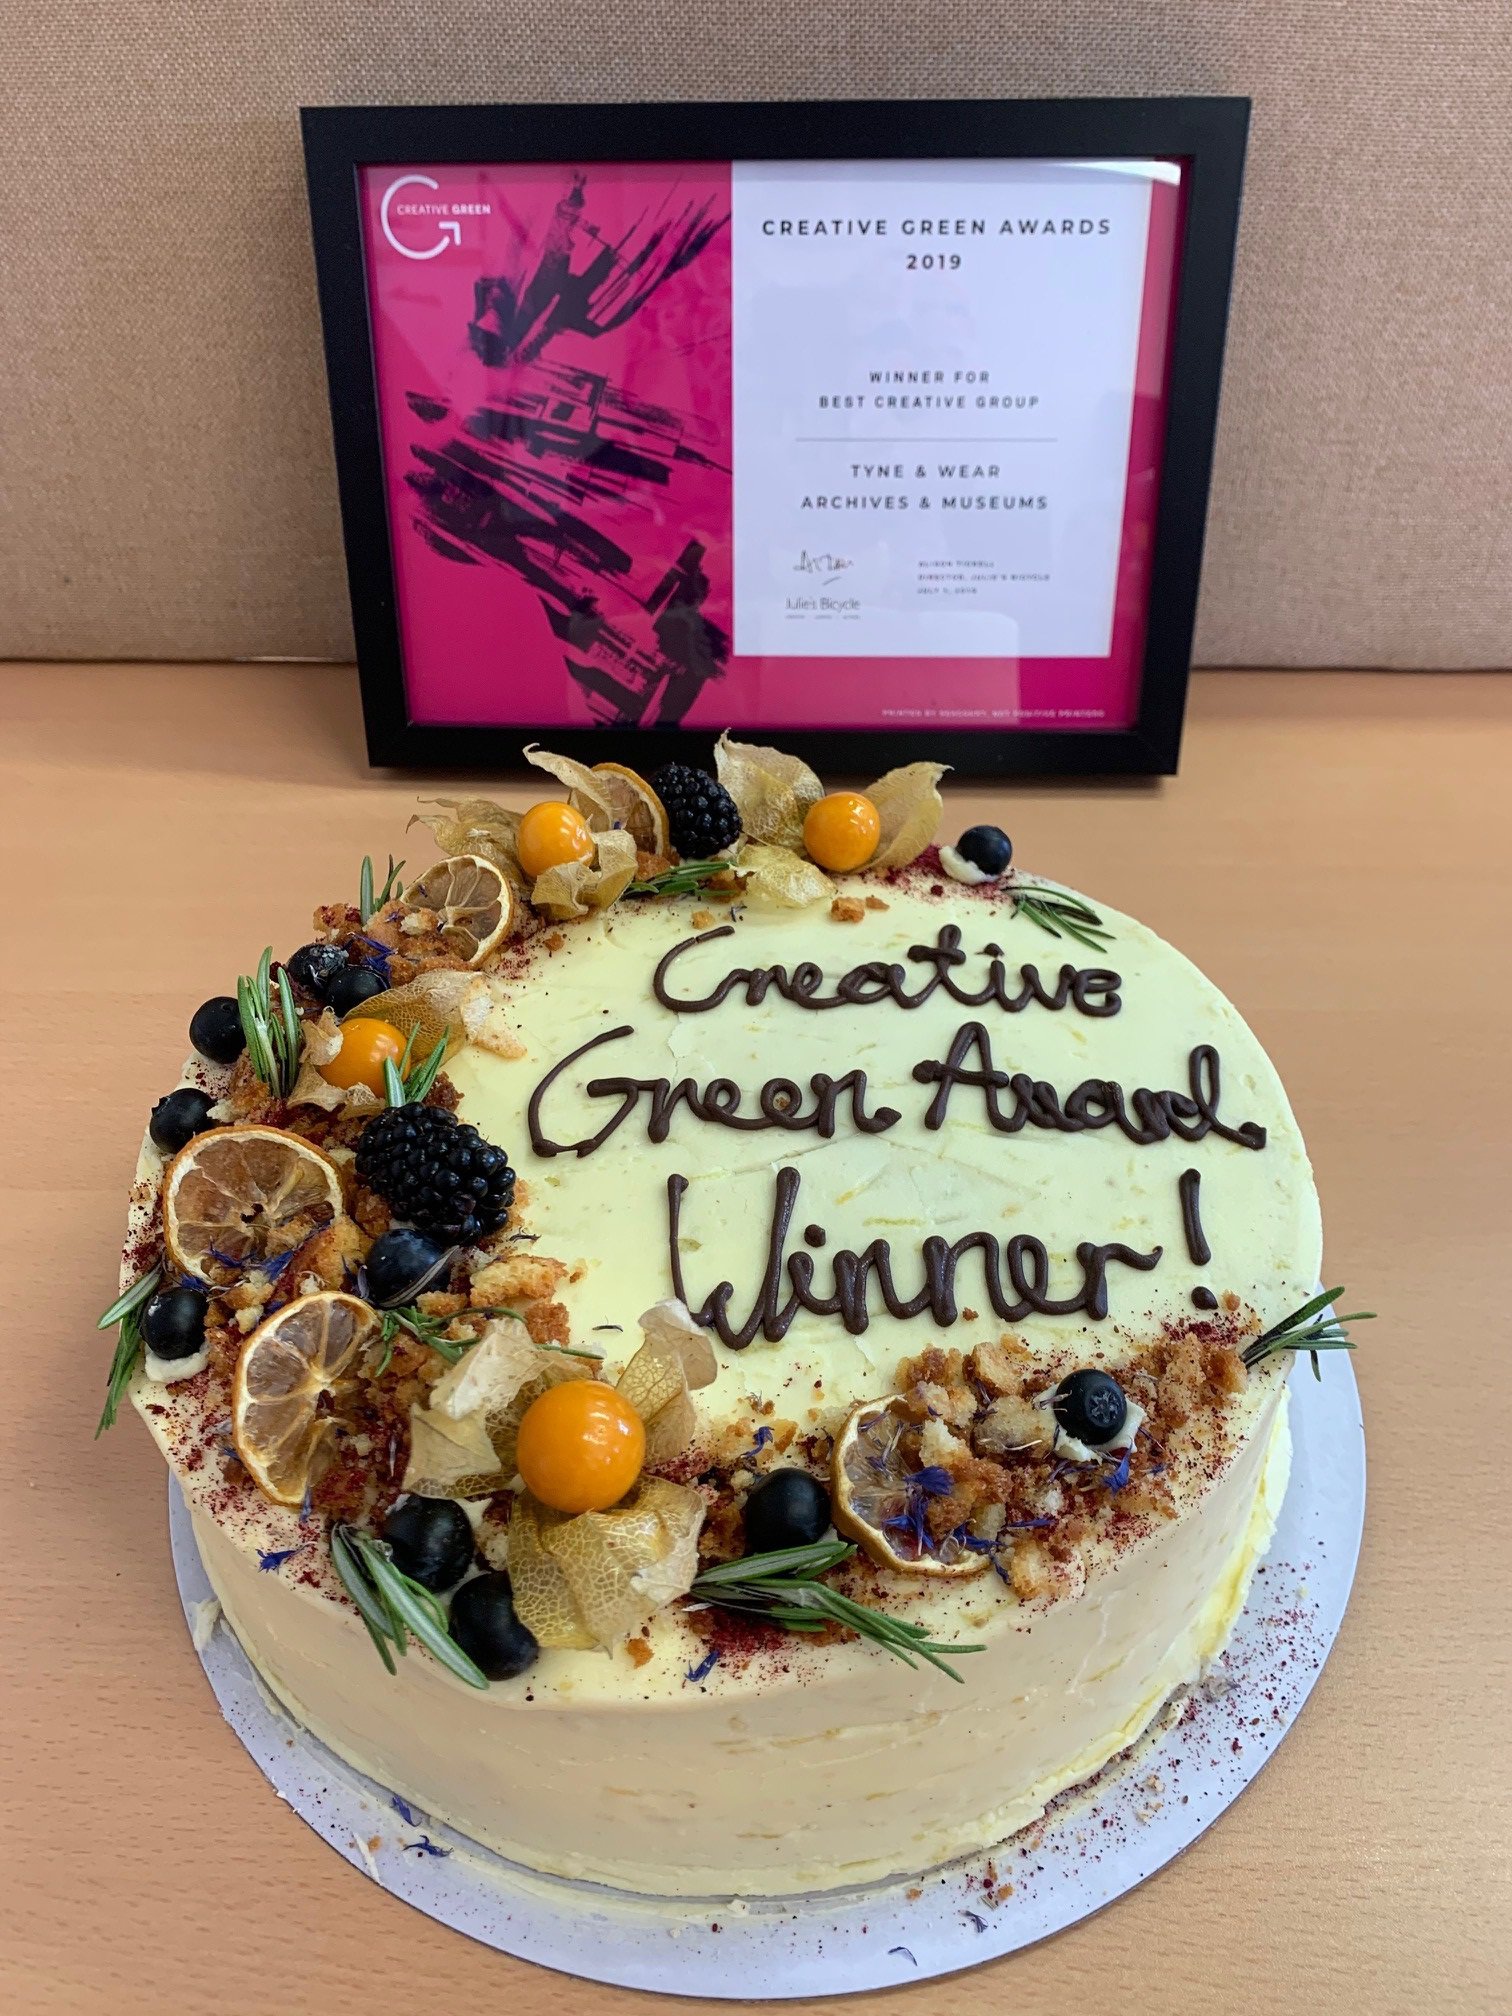 A cake iced with the words Creative Green Award Winner. A certificate to same effect is in the background